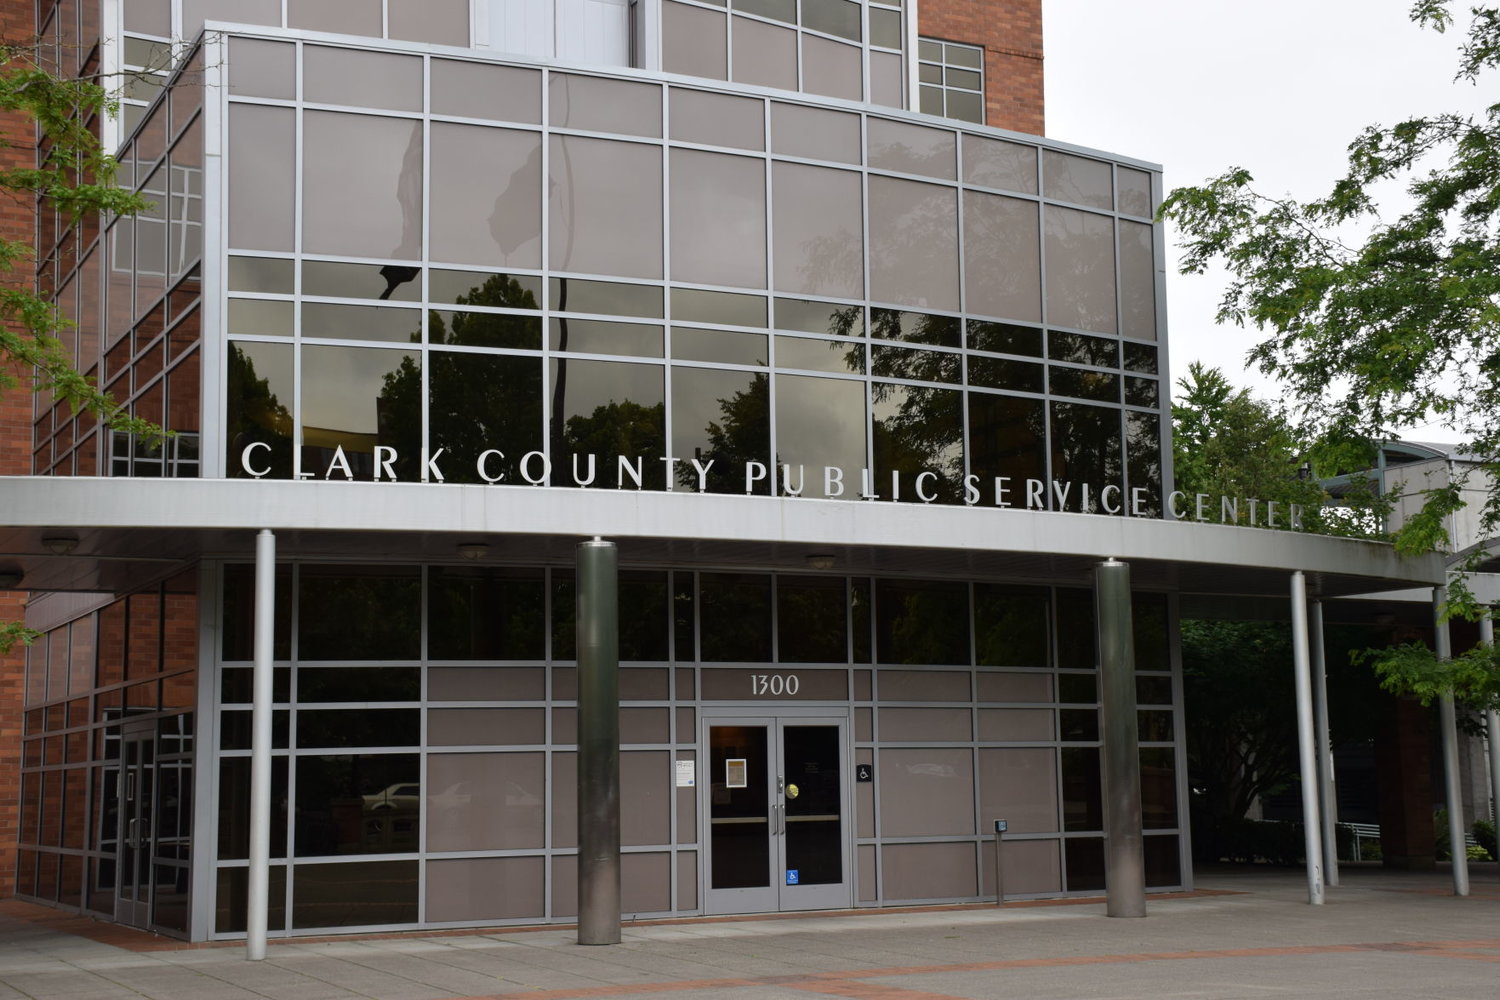 The Clark County Public Service Center in downtown Vancouver